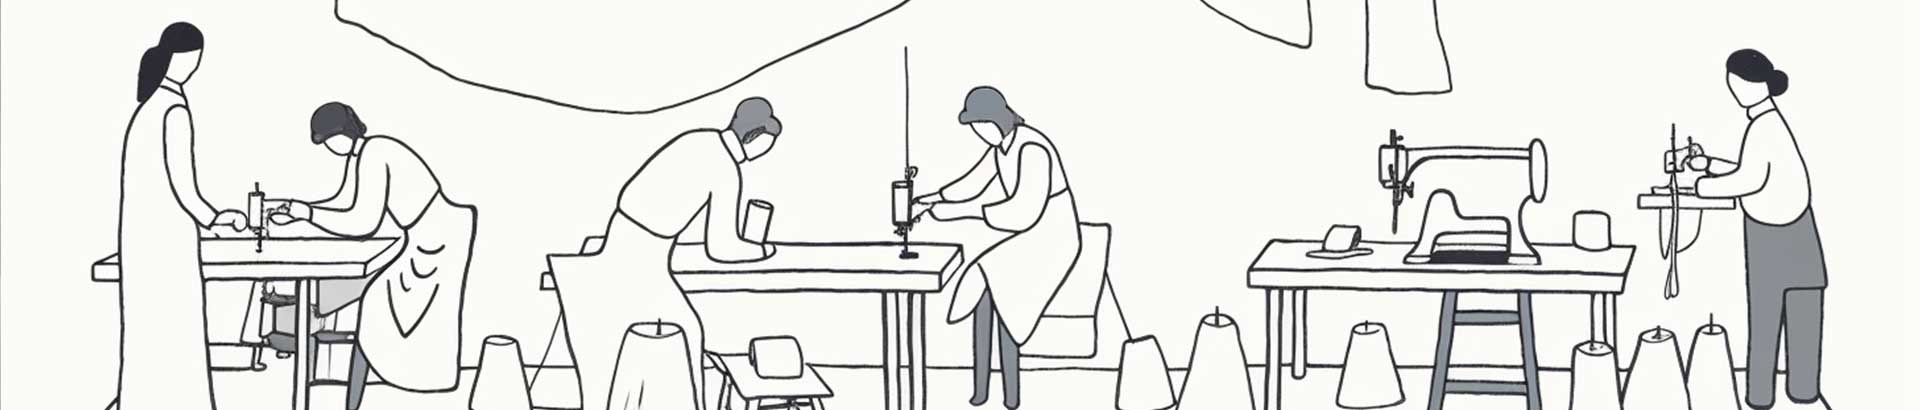 Line drawing of a seamstress crafting the alpaca duvet sections